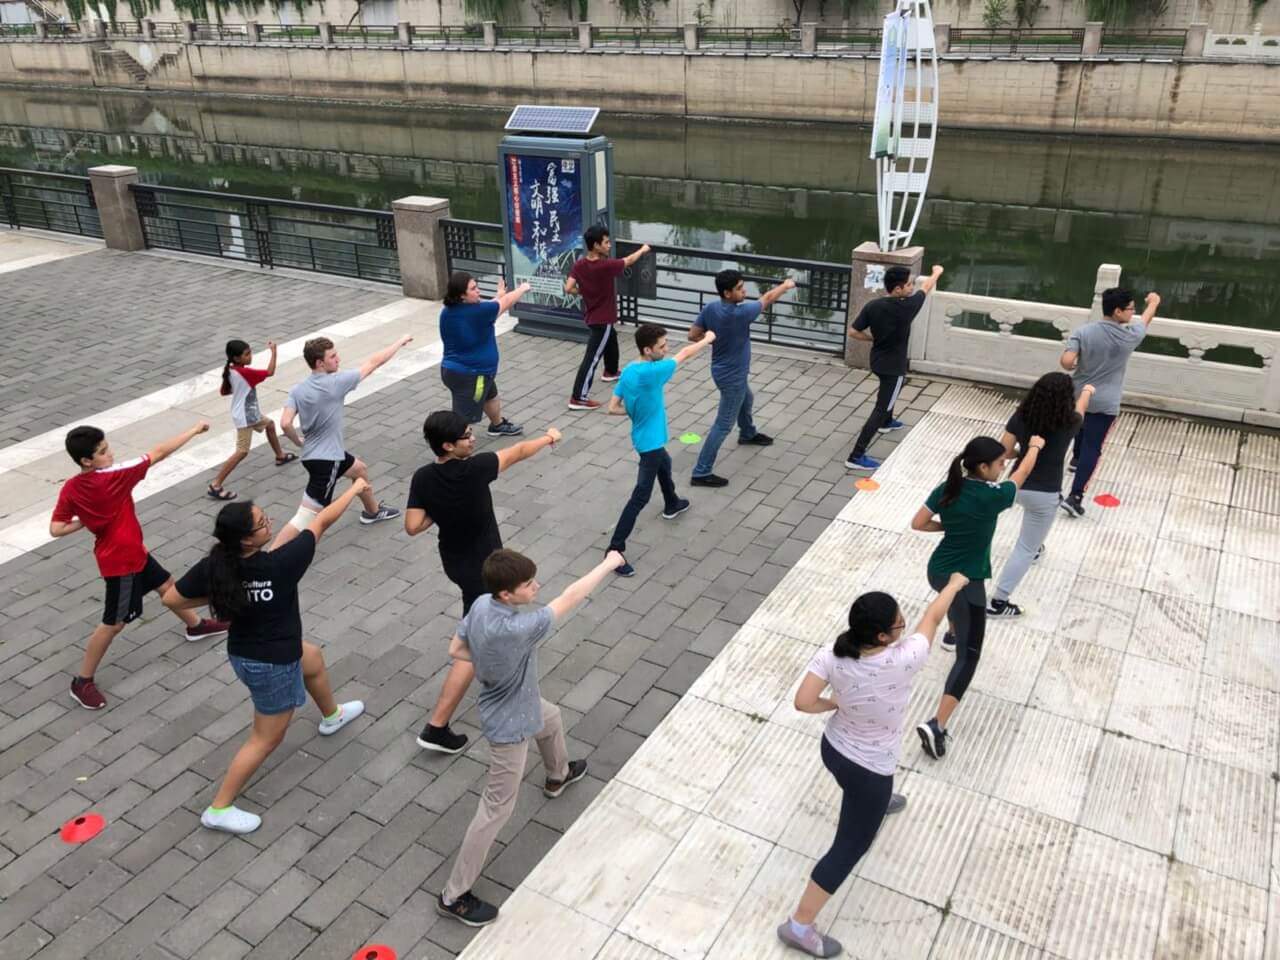 Mexican students practicing taiqi in Beijing, China